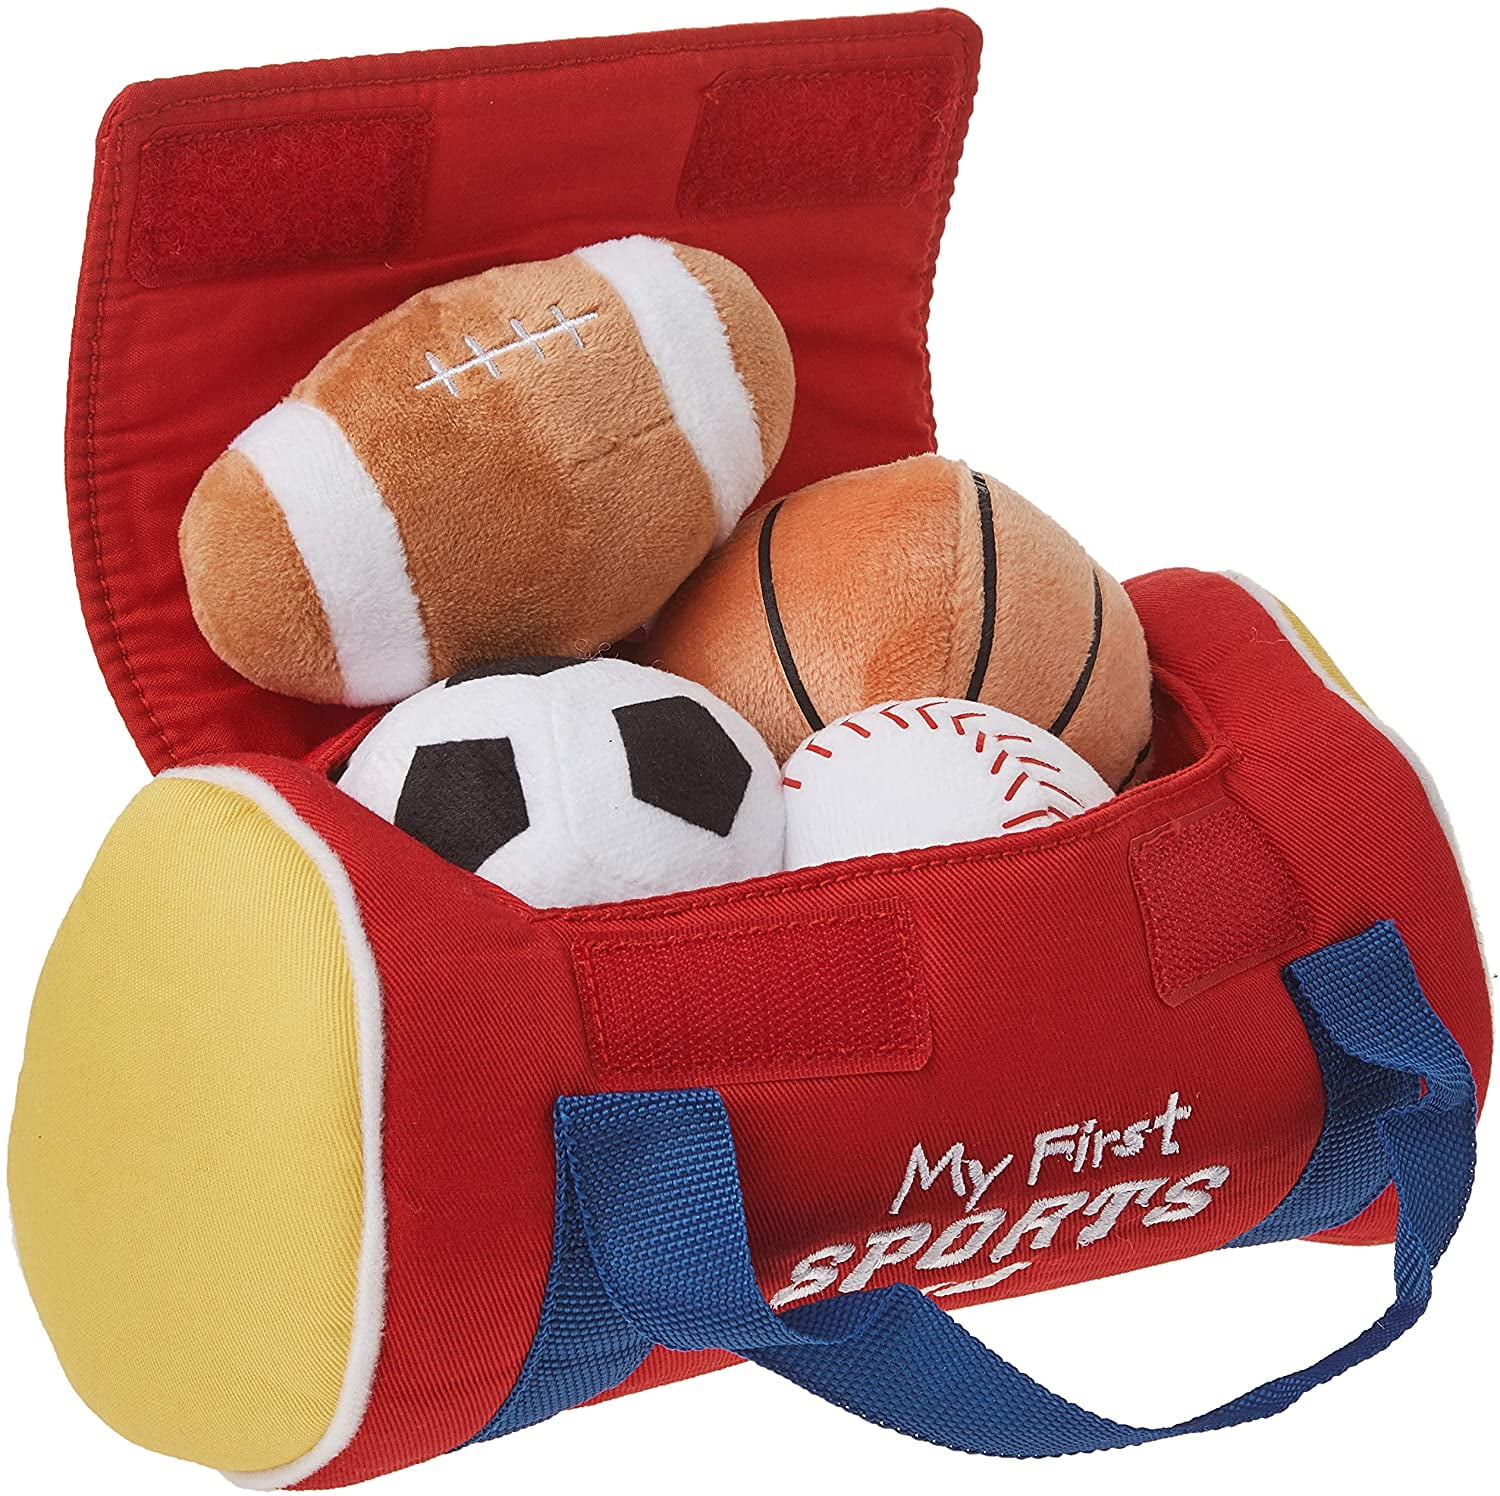 Baby First Soccer Ball/Football Rattle Stuffed Toy LG